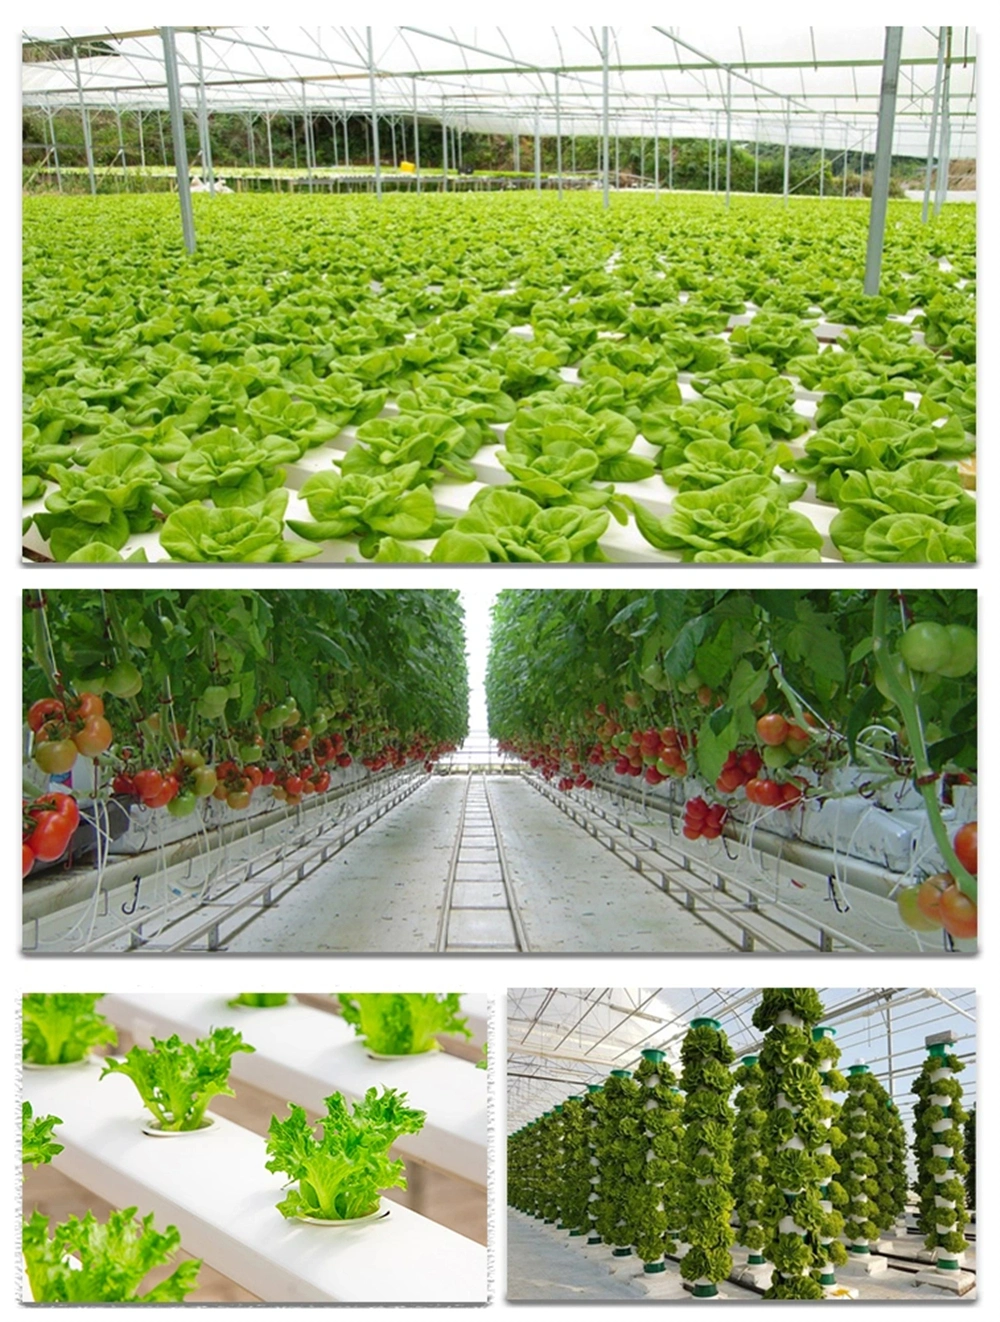 Single-Span/Multi-Span Plastic Film Greenhouse for Tomatoes/Cucumber/Peppers with Hydroponic System